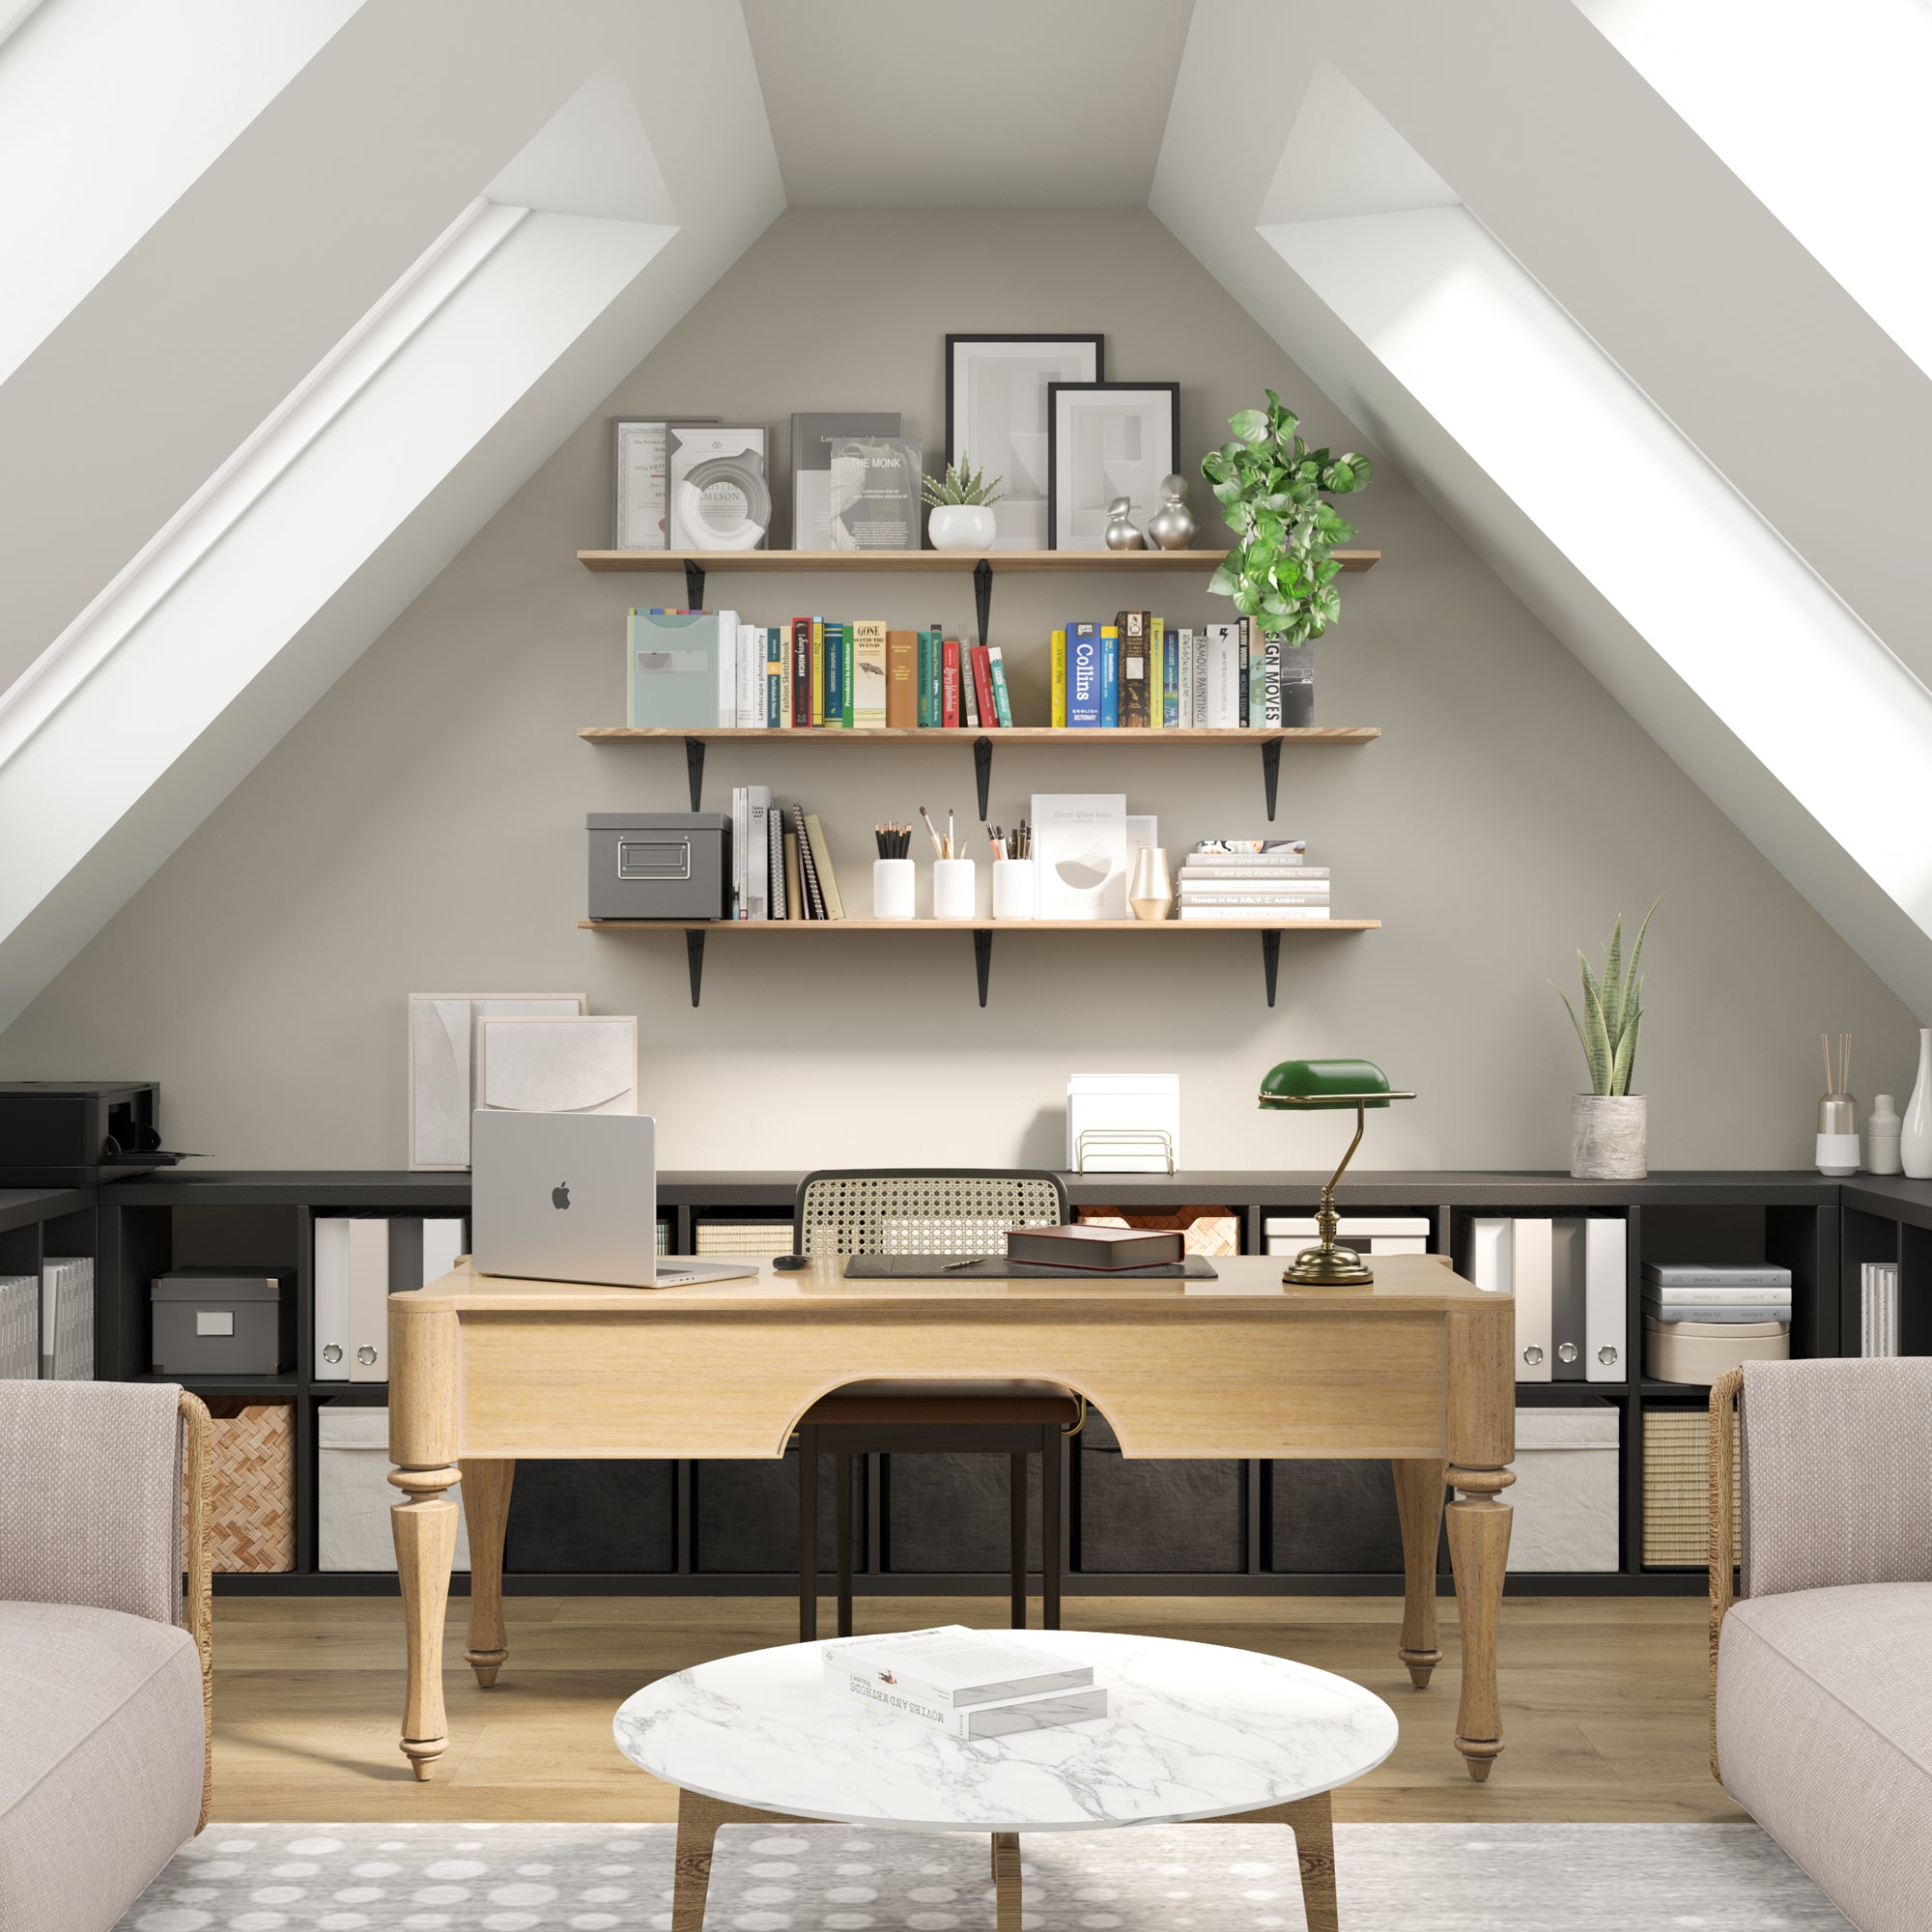 A neatly organized attic office space with burnt color office shelves holding books and supplies, creating a productive environment.